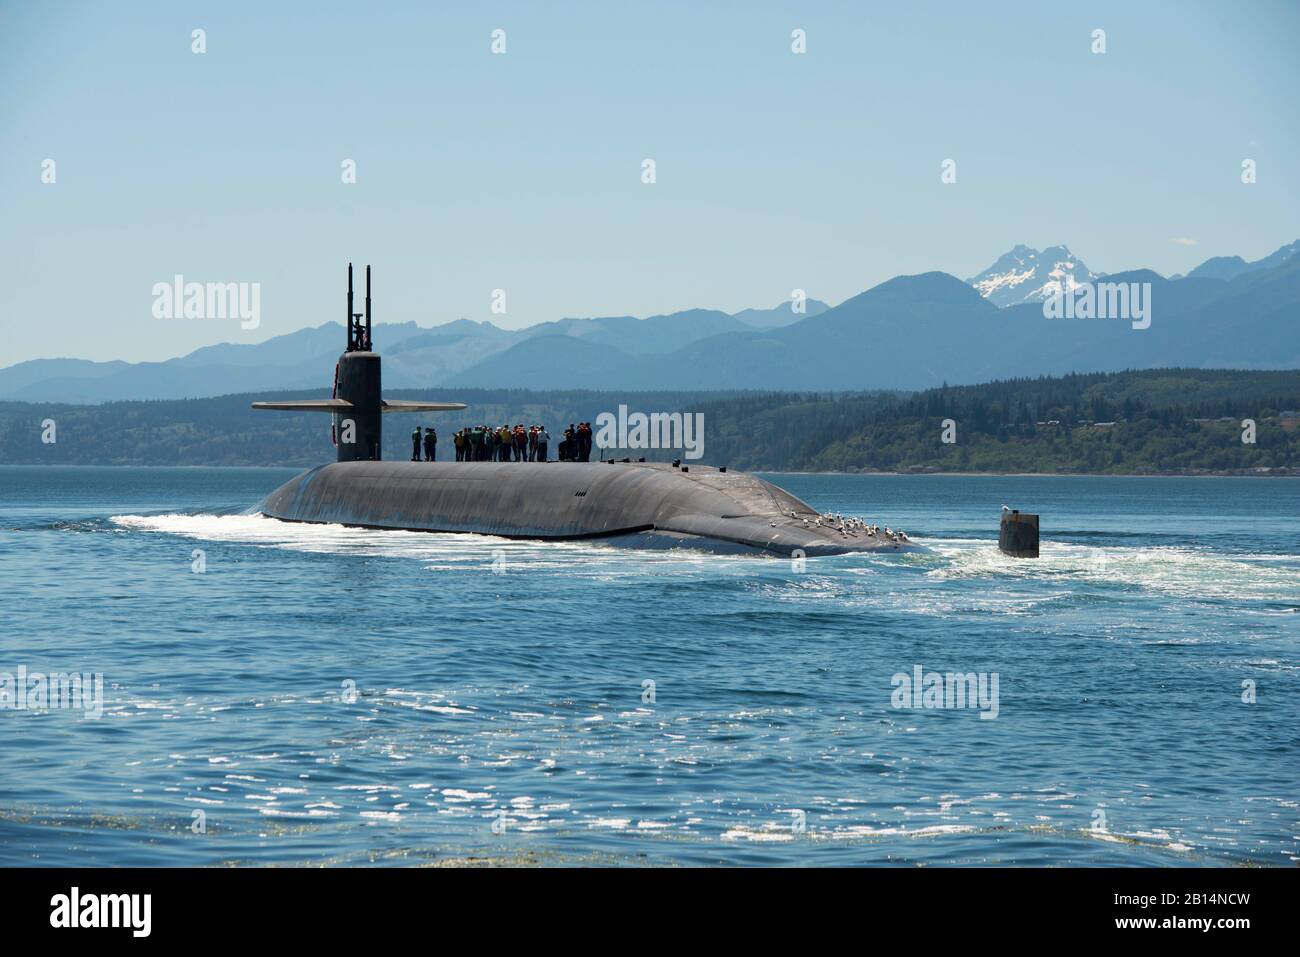 The Ohio-class ballistic missile submarine USS Nebraska (SSBN 739) transits the Hood Canal as it returns home Naval Base Kitsap-Bangor, Washington, following the boat's first strategic patrol since 2013. Nebraska recently completed a 41-month engineered refueling overhaul, which will extend the life of the submarine for another 20 years. (U.S. Navy photo by Mass Communication Specialist 1st Class Amanda R. Gray) Stock Photo